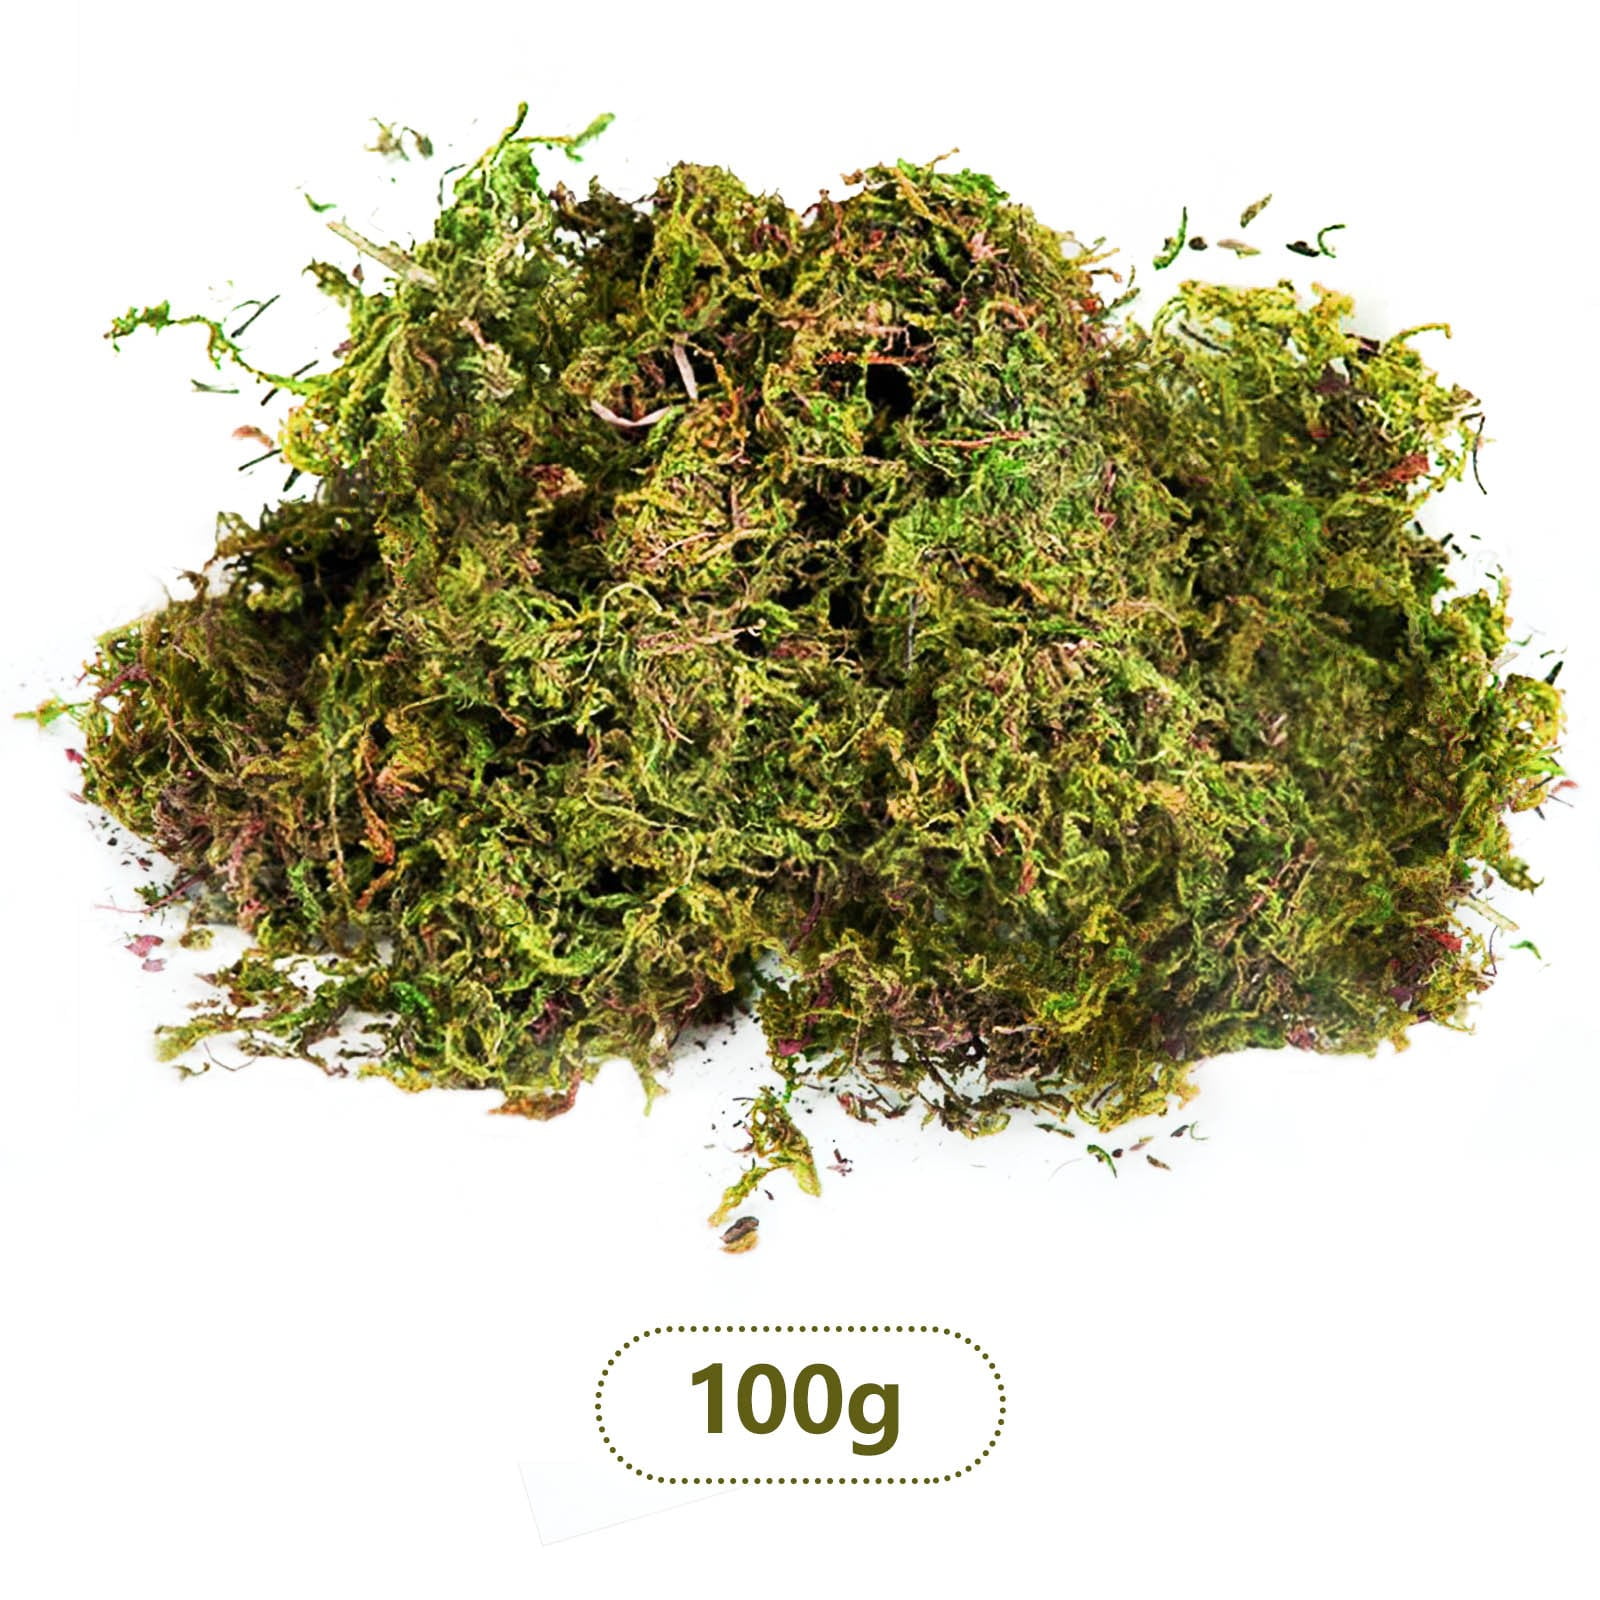 Fake Moss Artificial Moss for Potted Plants Greenery Moss Home Decor Fairy Garden Crafts Wedding Decoration Fresh Green 100g